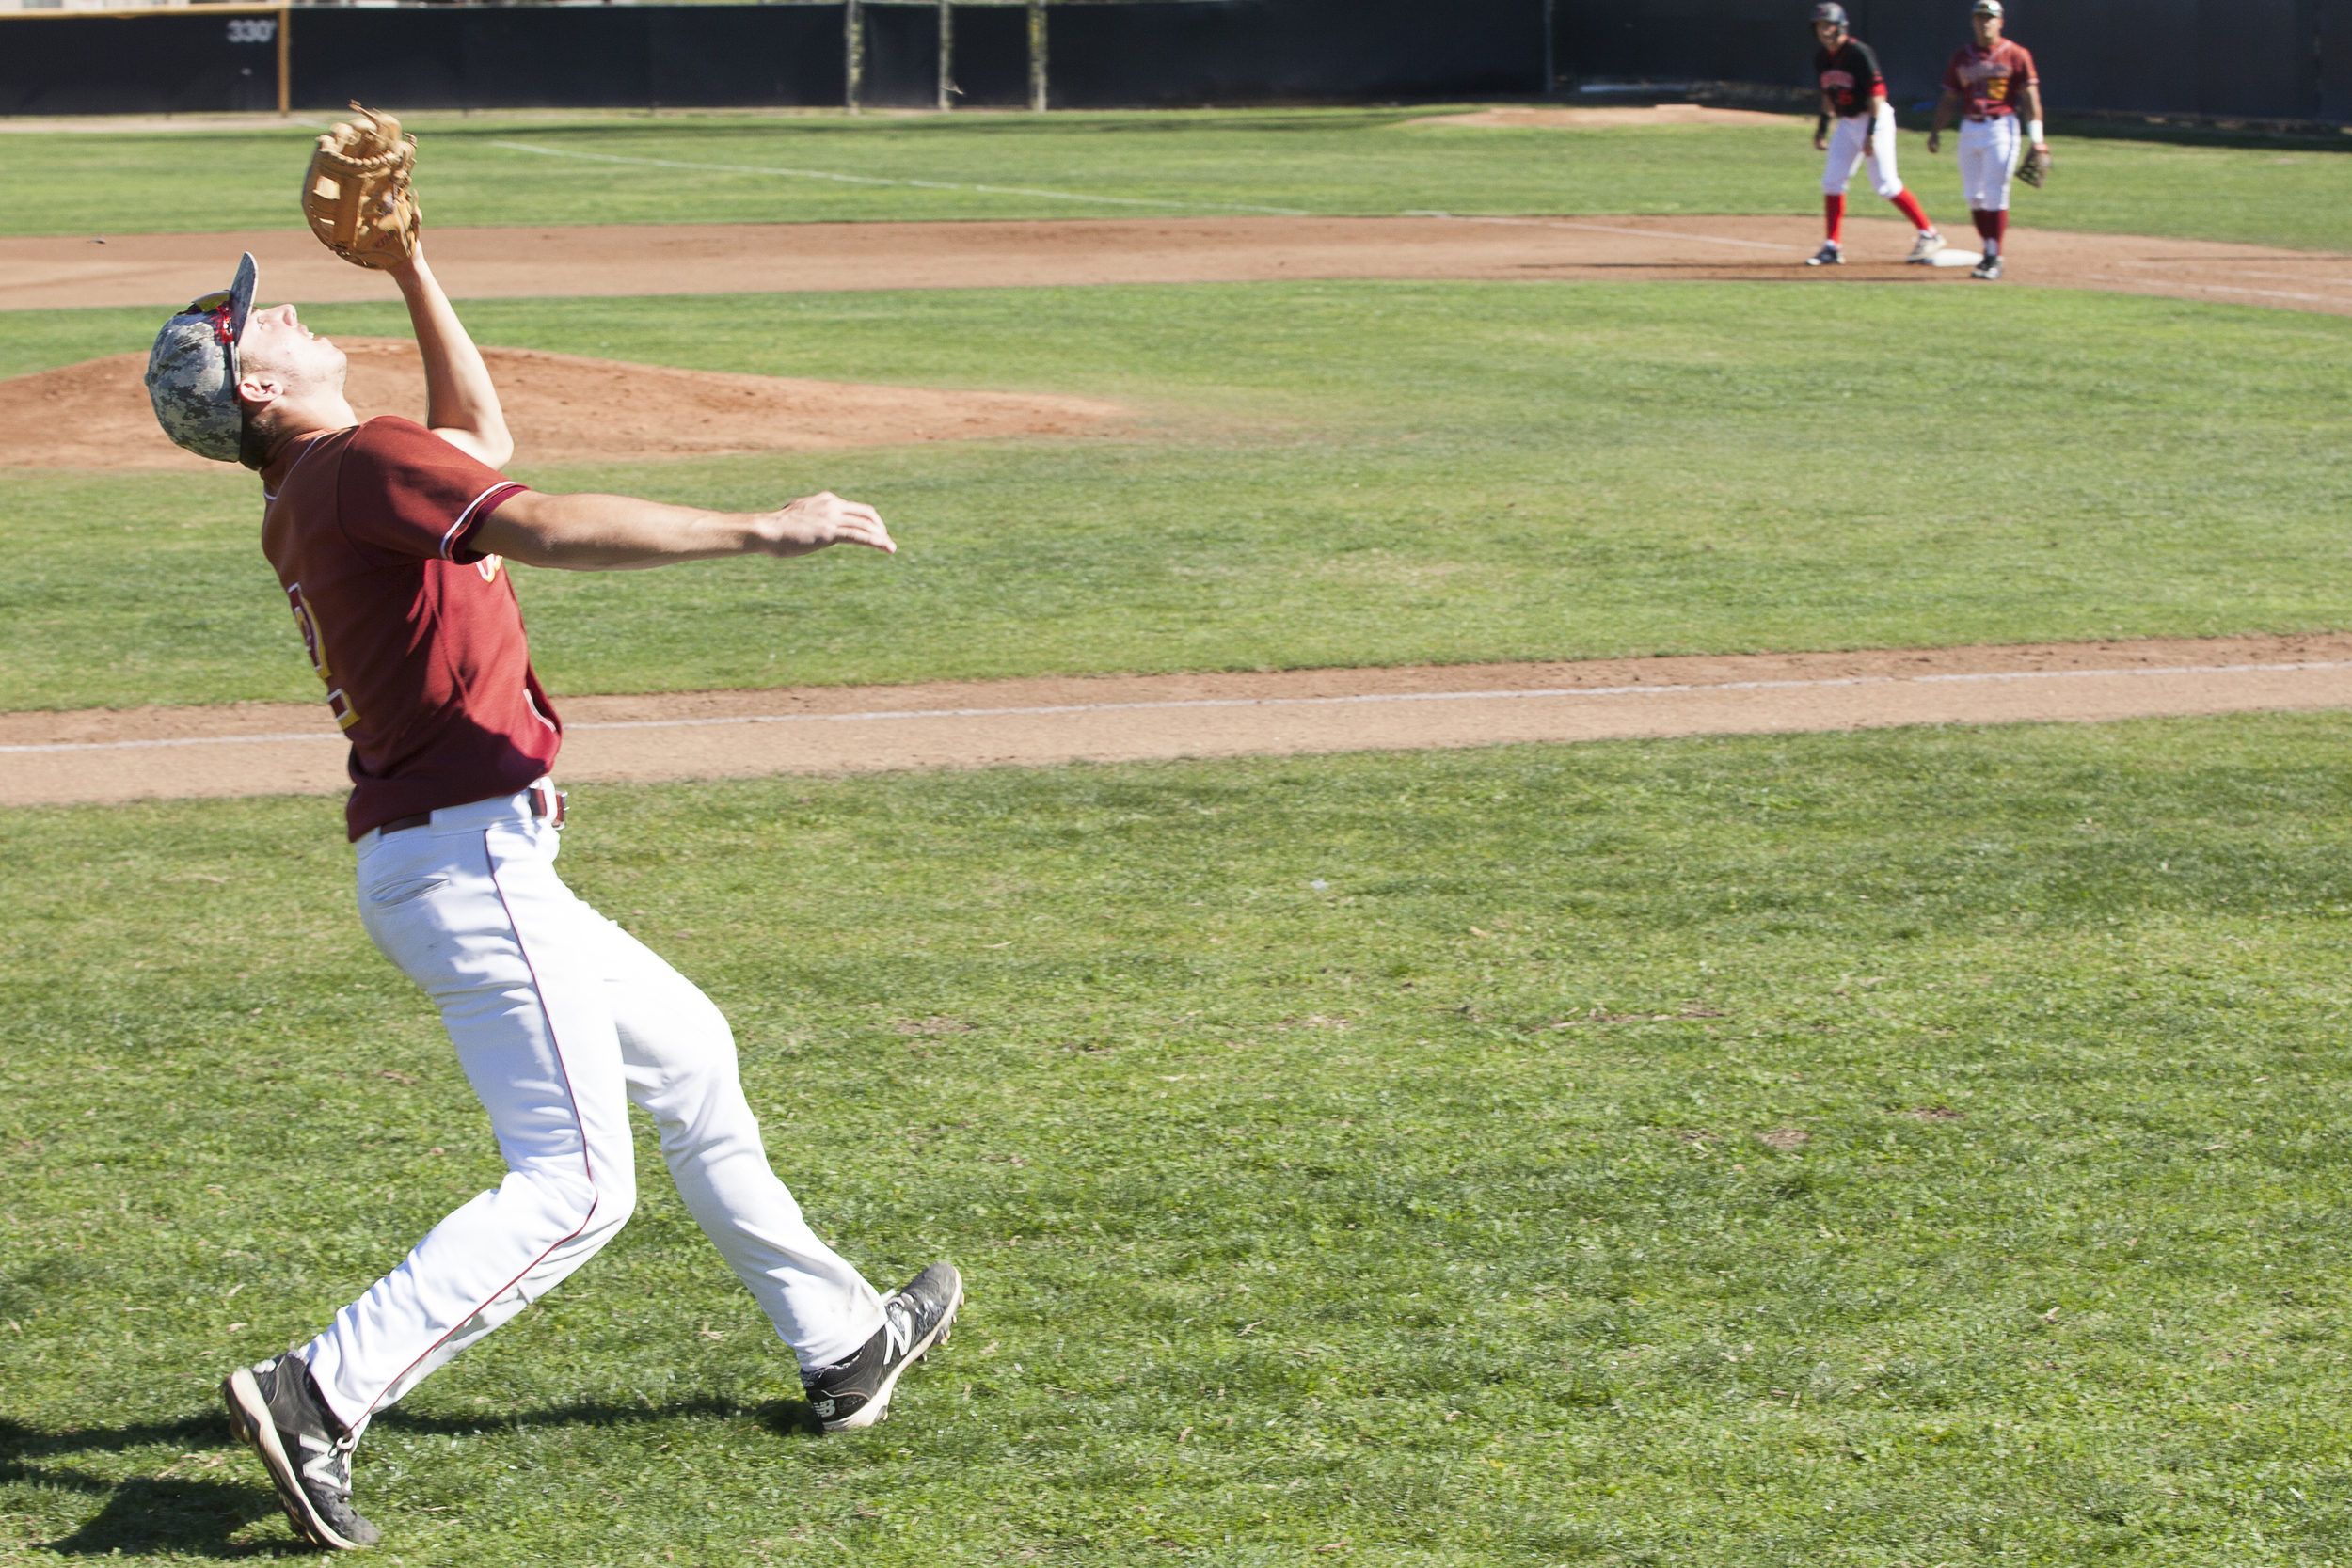  Glendale College 3rd baseman Frank Garriola catches a foul flyball in the second inning during a game against Pierce College in Woodland Hills, Calif. on Saturday, Feb. 13, 2016. 